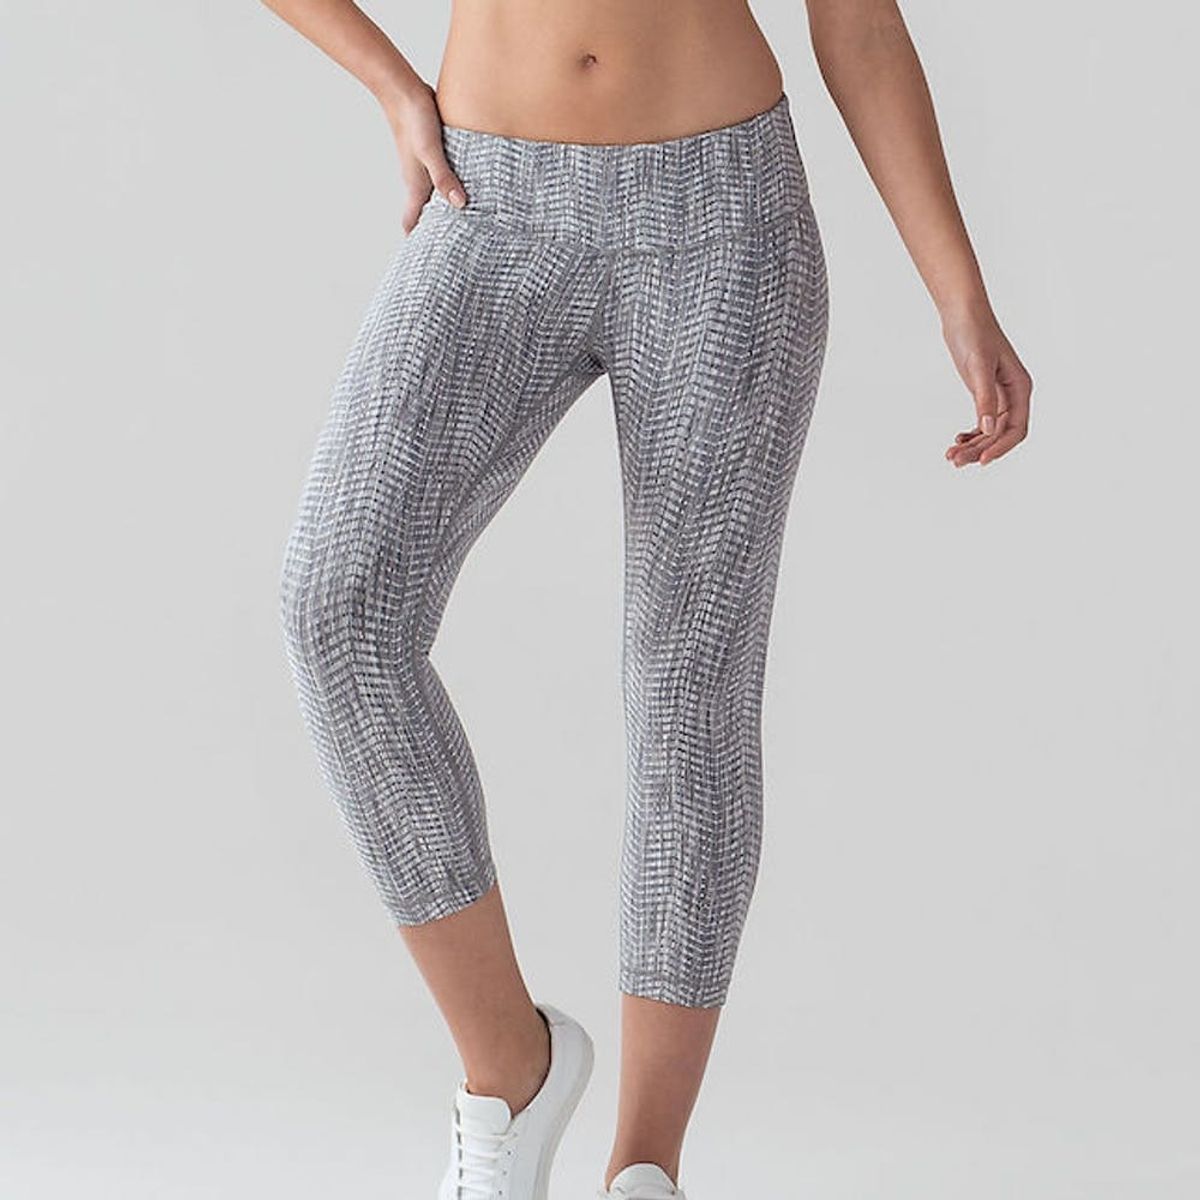 Meet the Leggings That Have Been Pinned More Than 213,000 Times